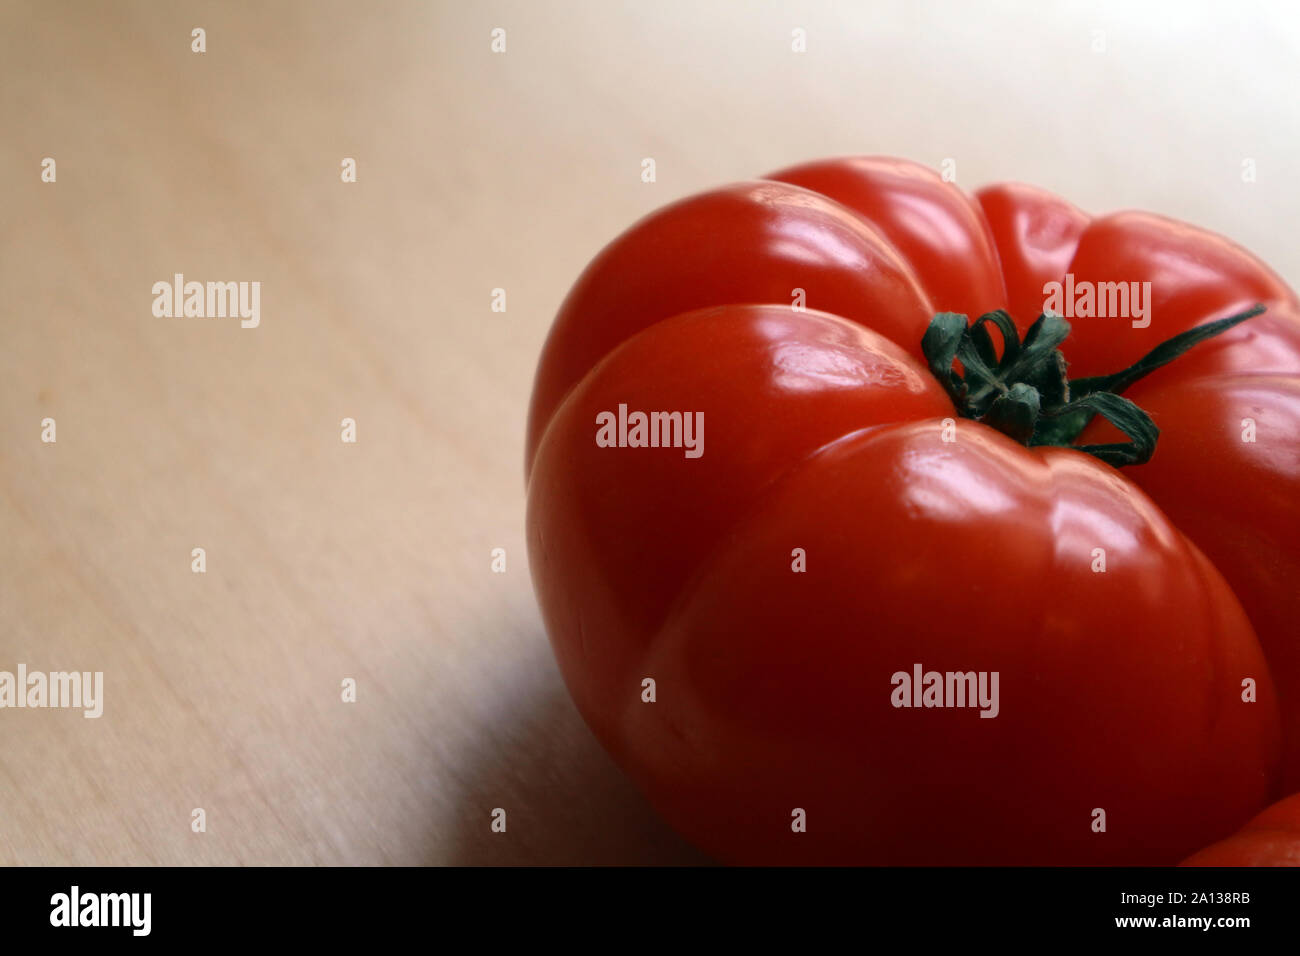 Single large ripe red whole tomatoes on chopping board Stock Photo